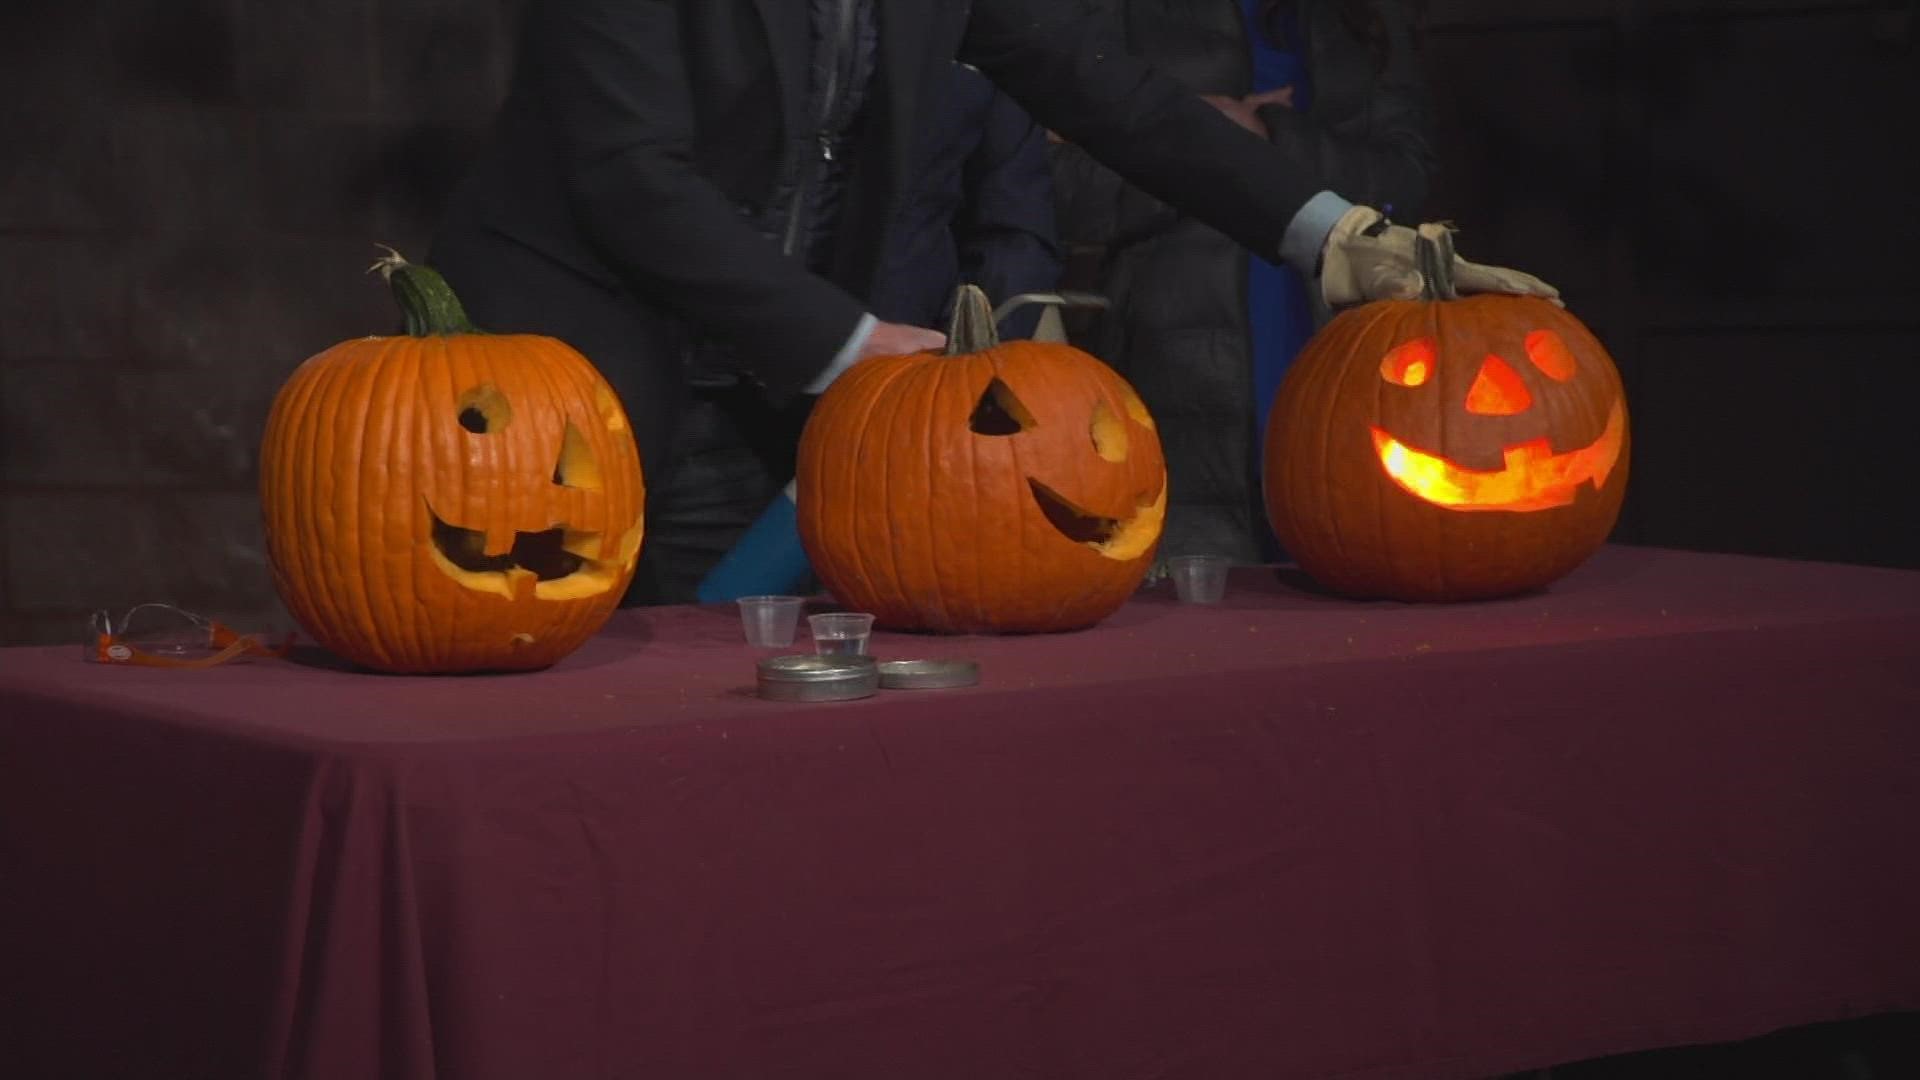 Science guy Steve Spangler is back to honor our long-standing tradition of carving pumpkins using some cool chemistry.